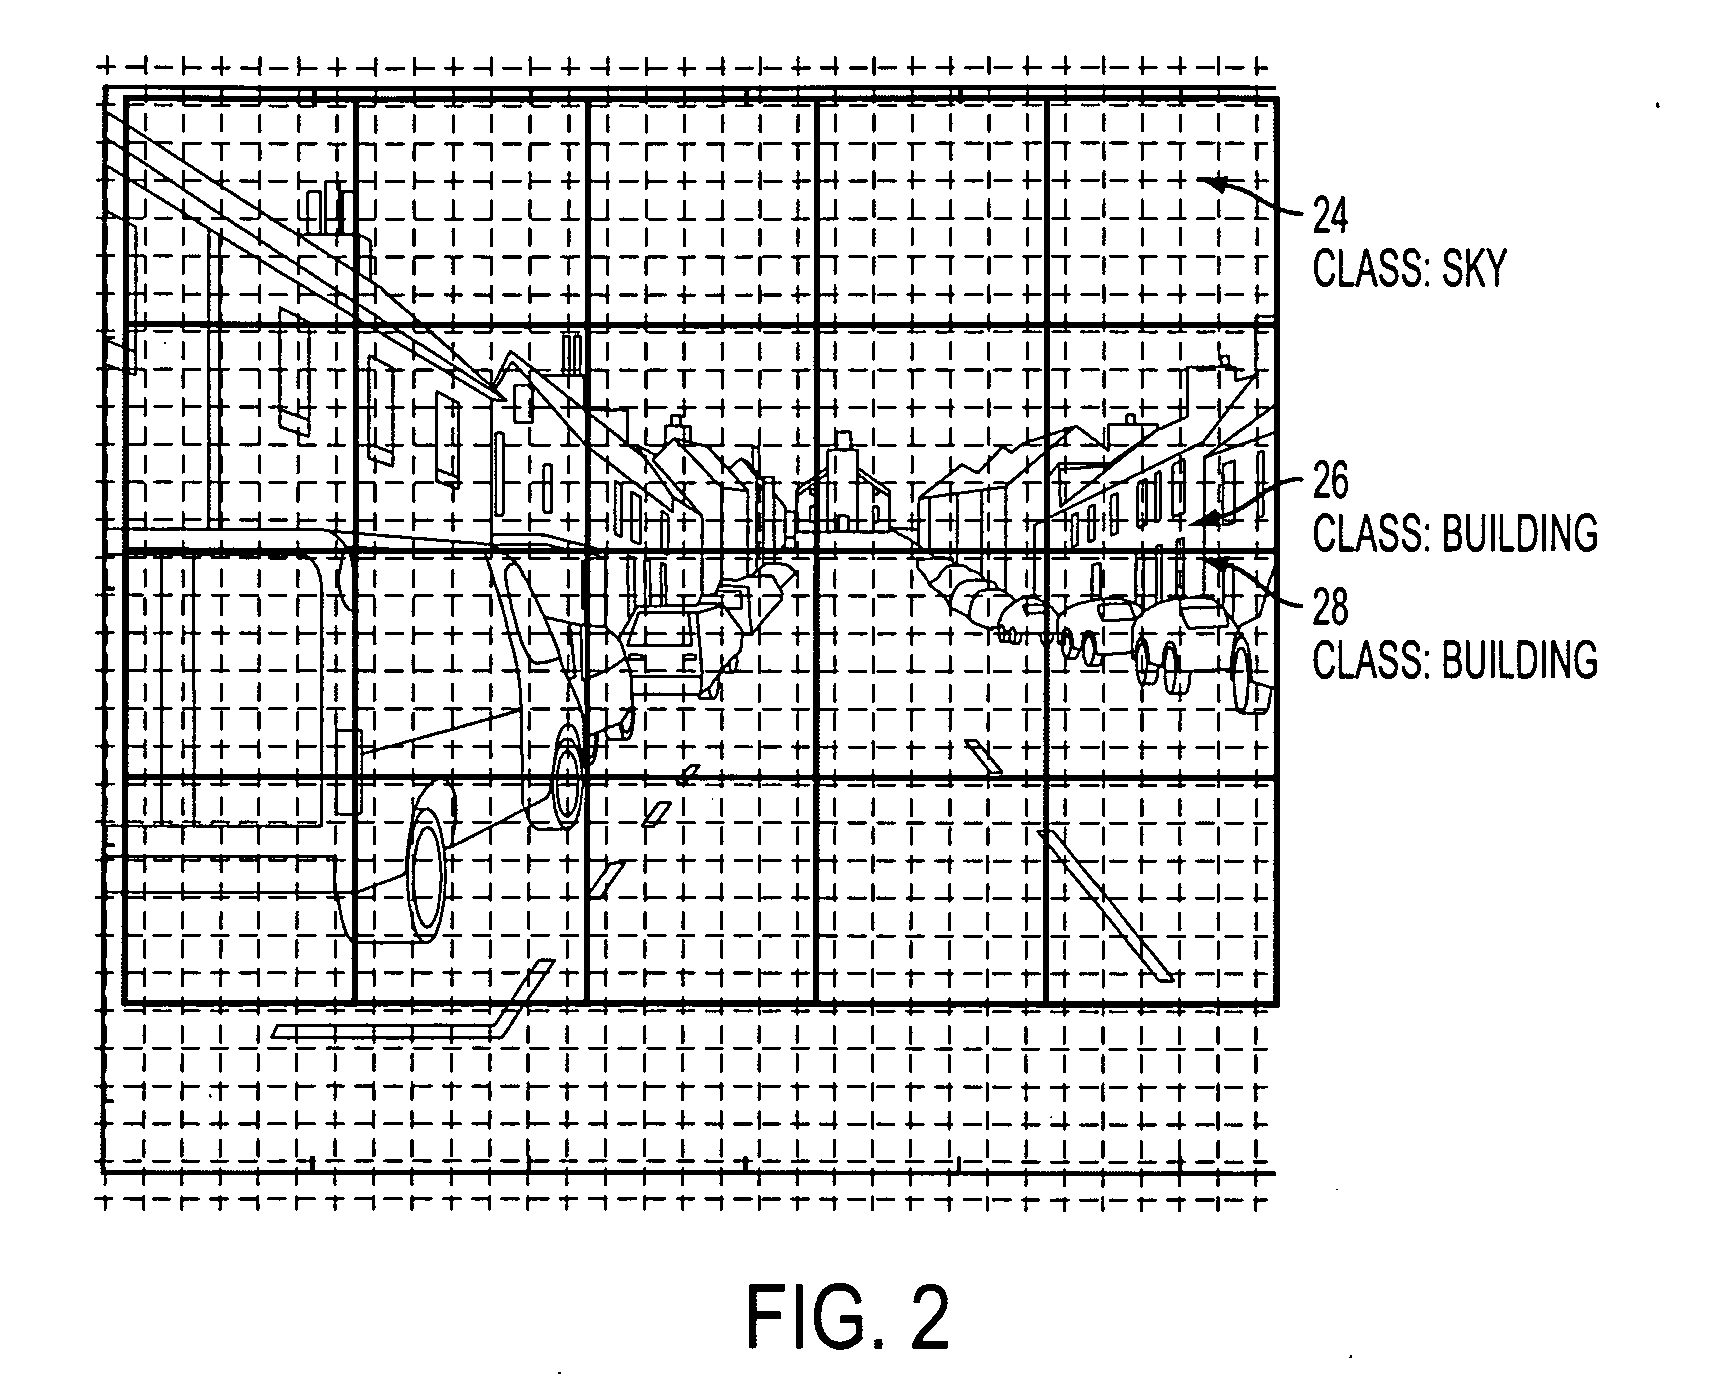 System and method for object class localization and semantic class based image segmentation